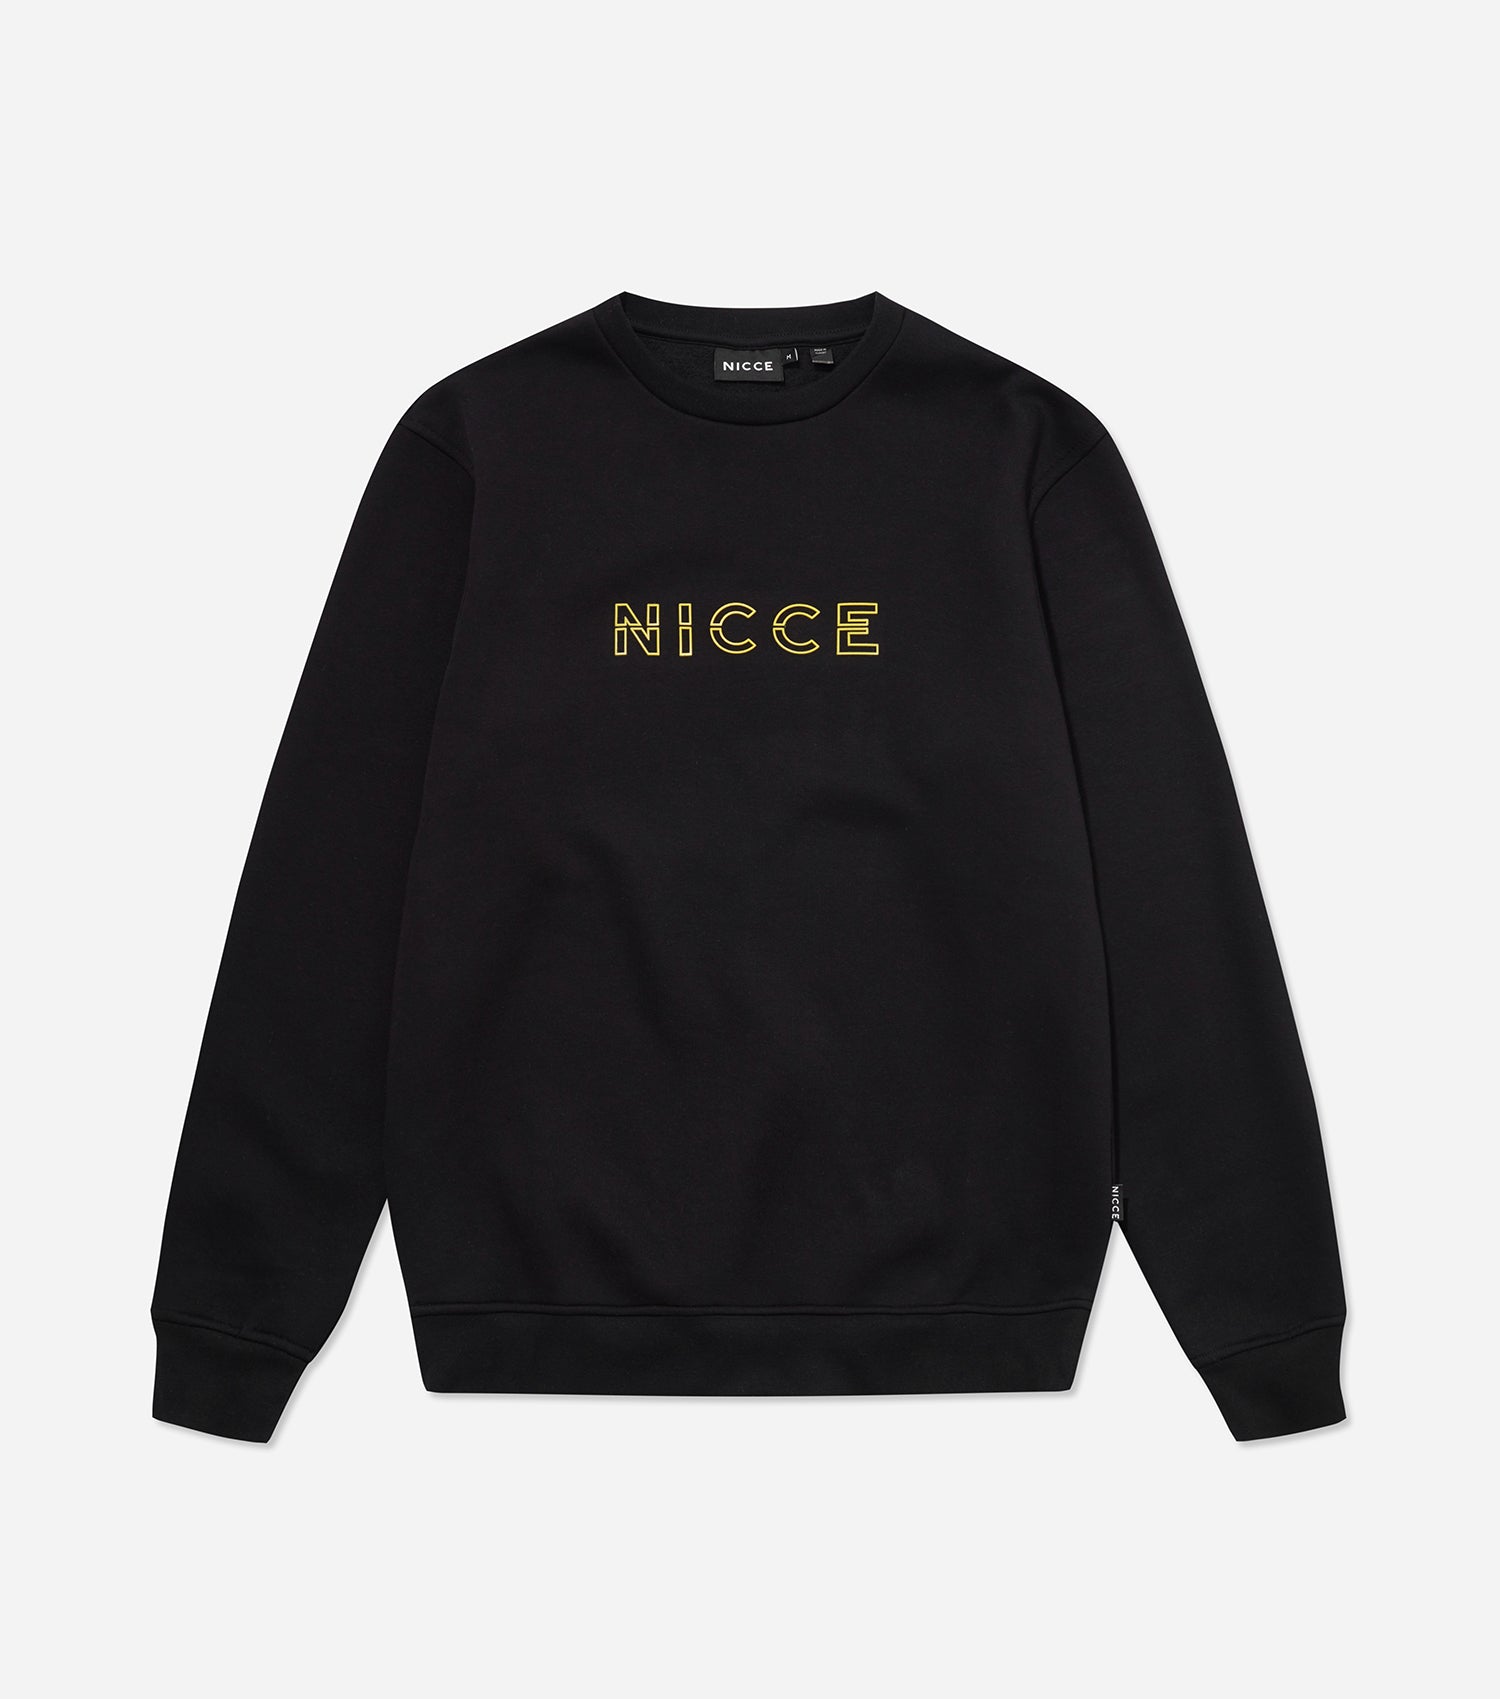 NICCE | Contemporary casualwear & streetwear for men and women